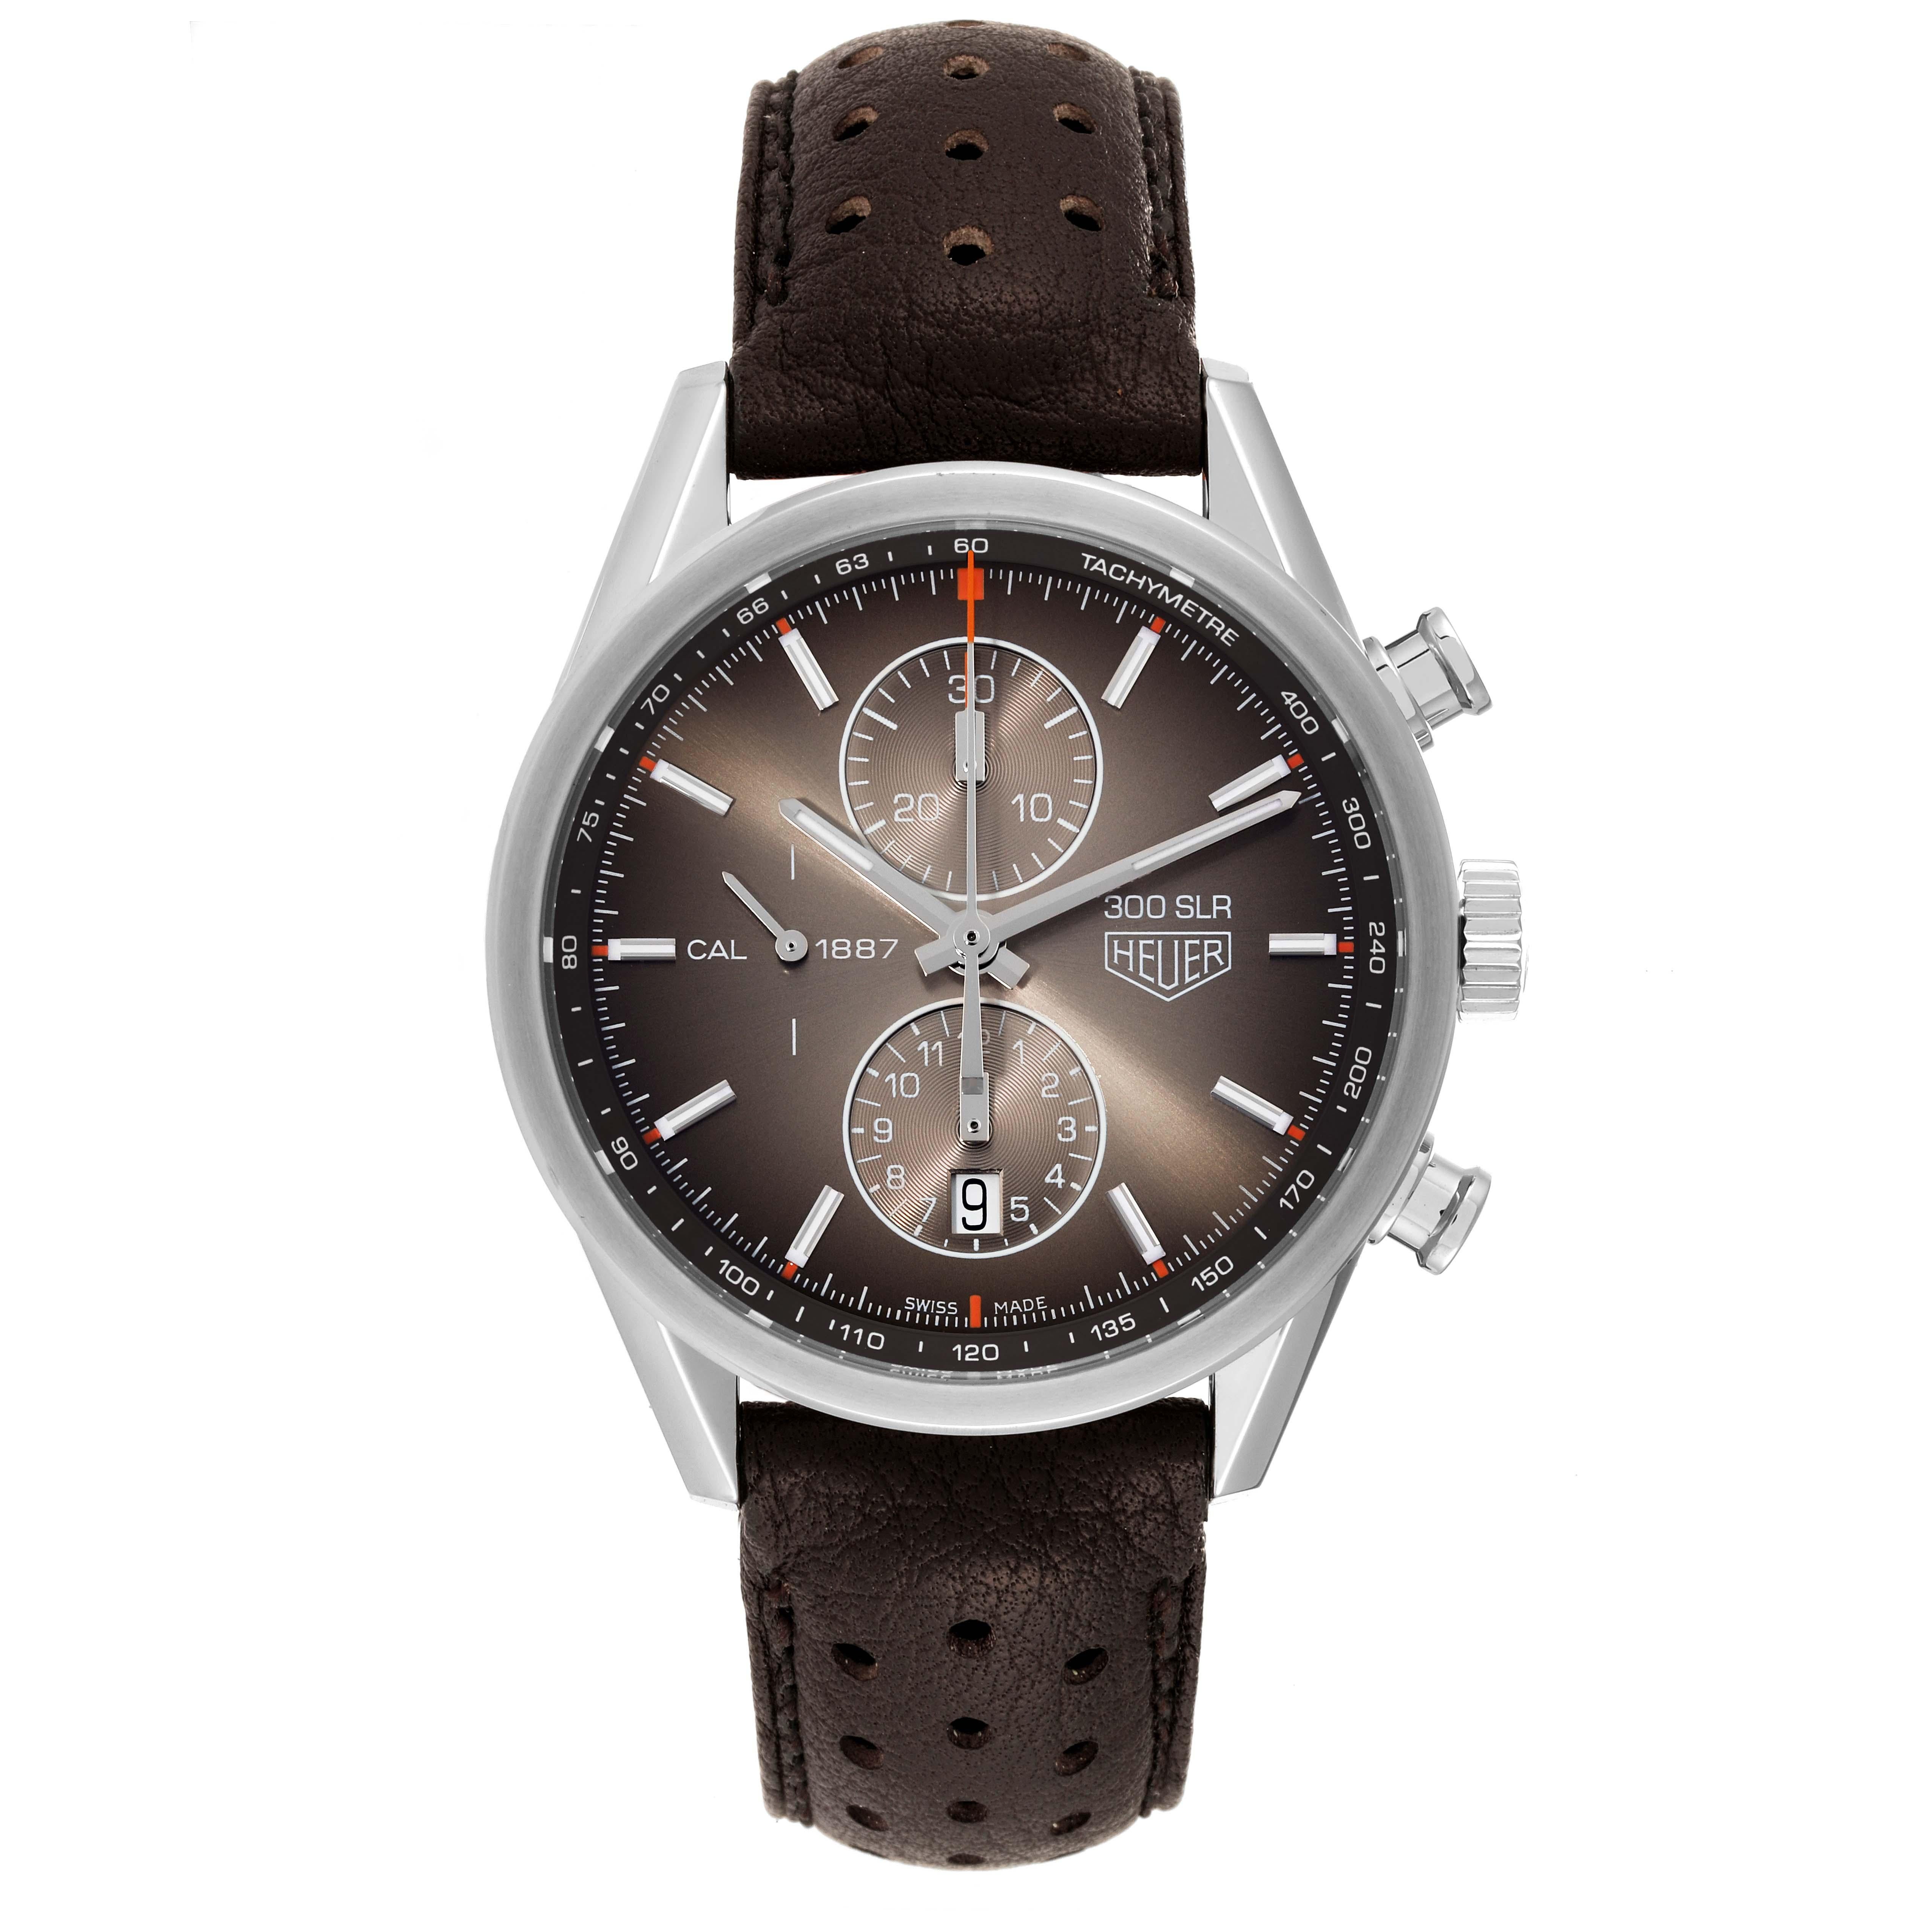 Tag Heuer Carrera 300 SLR Calibre 1887 Steel Mens Watch CAR2112 Box Card. Automatic self-winding movement. Stainless steel case 41.0 mm in diameter. Stainless steel smooth bezel. Scratch resistant sapphire crystal. Brown sunburst dial with luminous